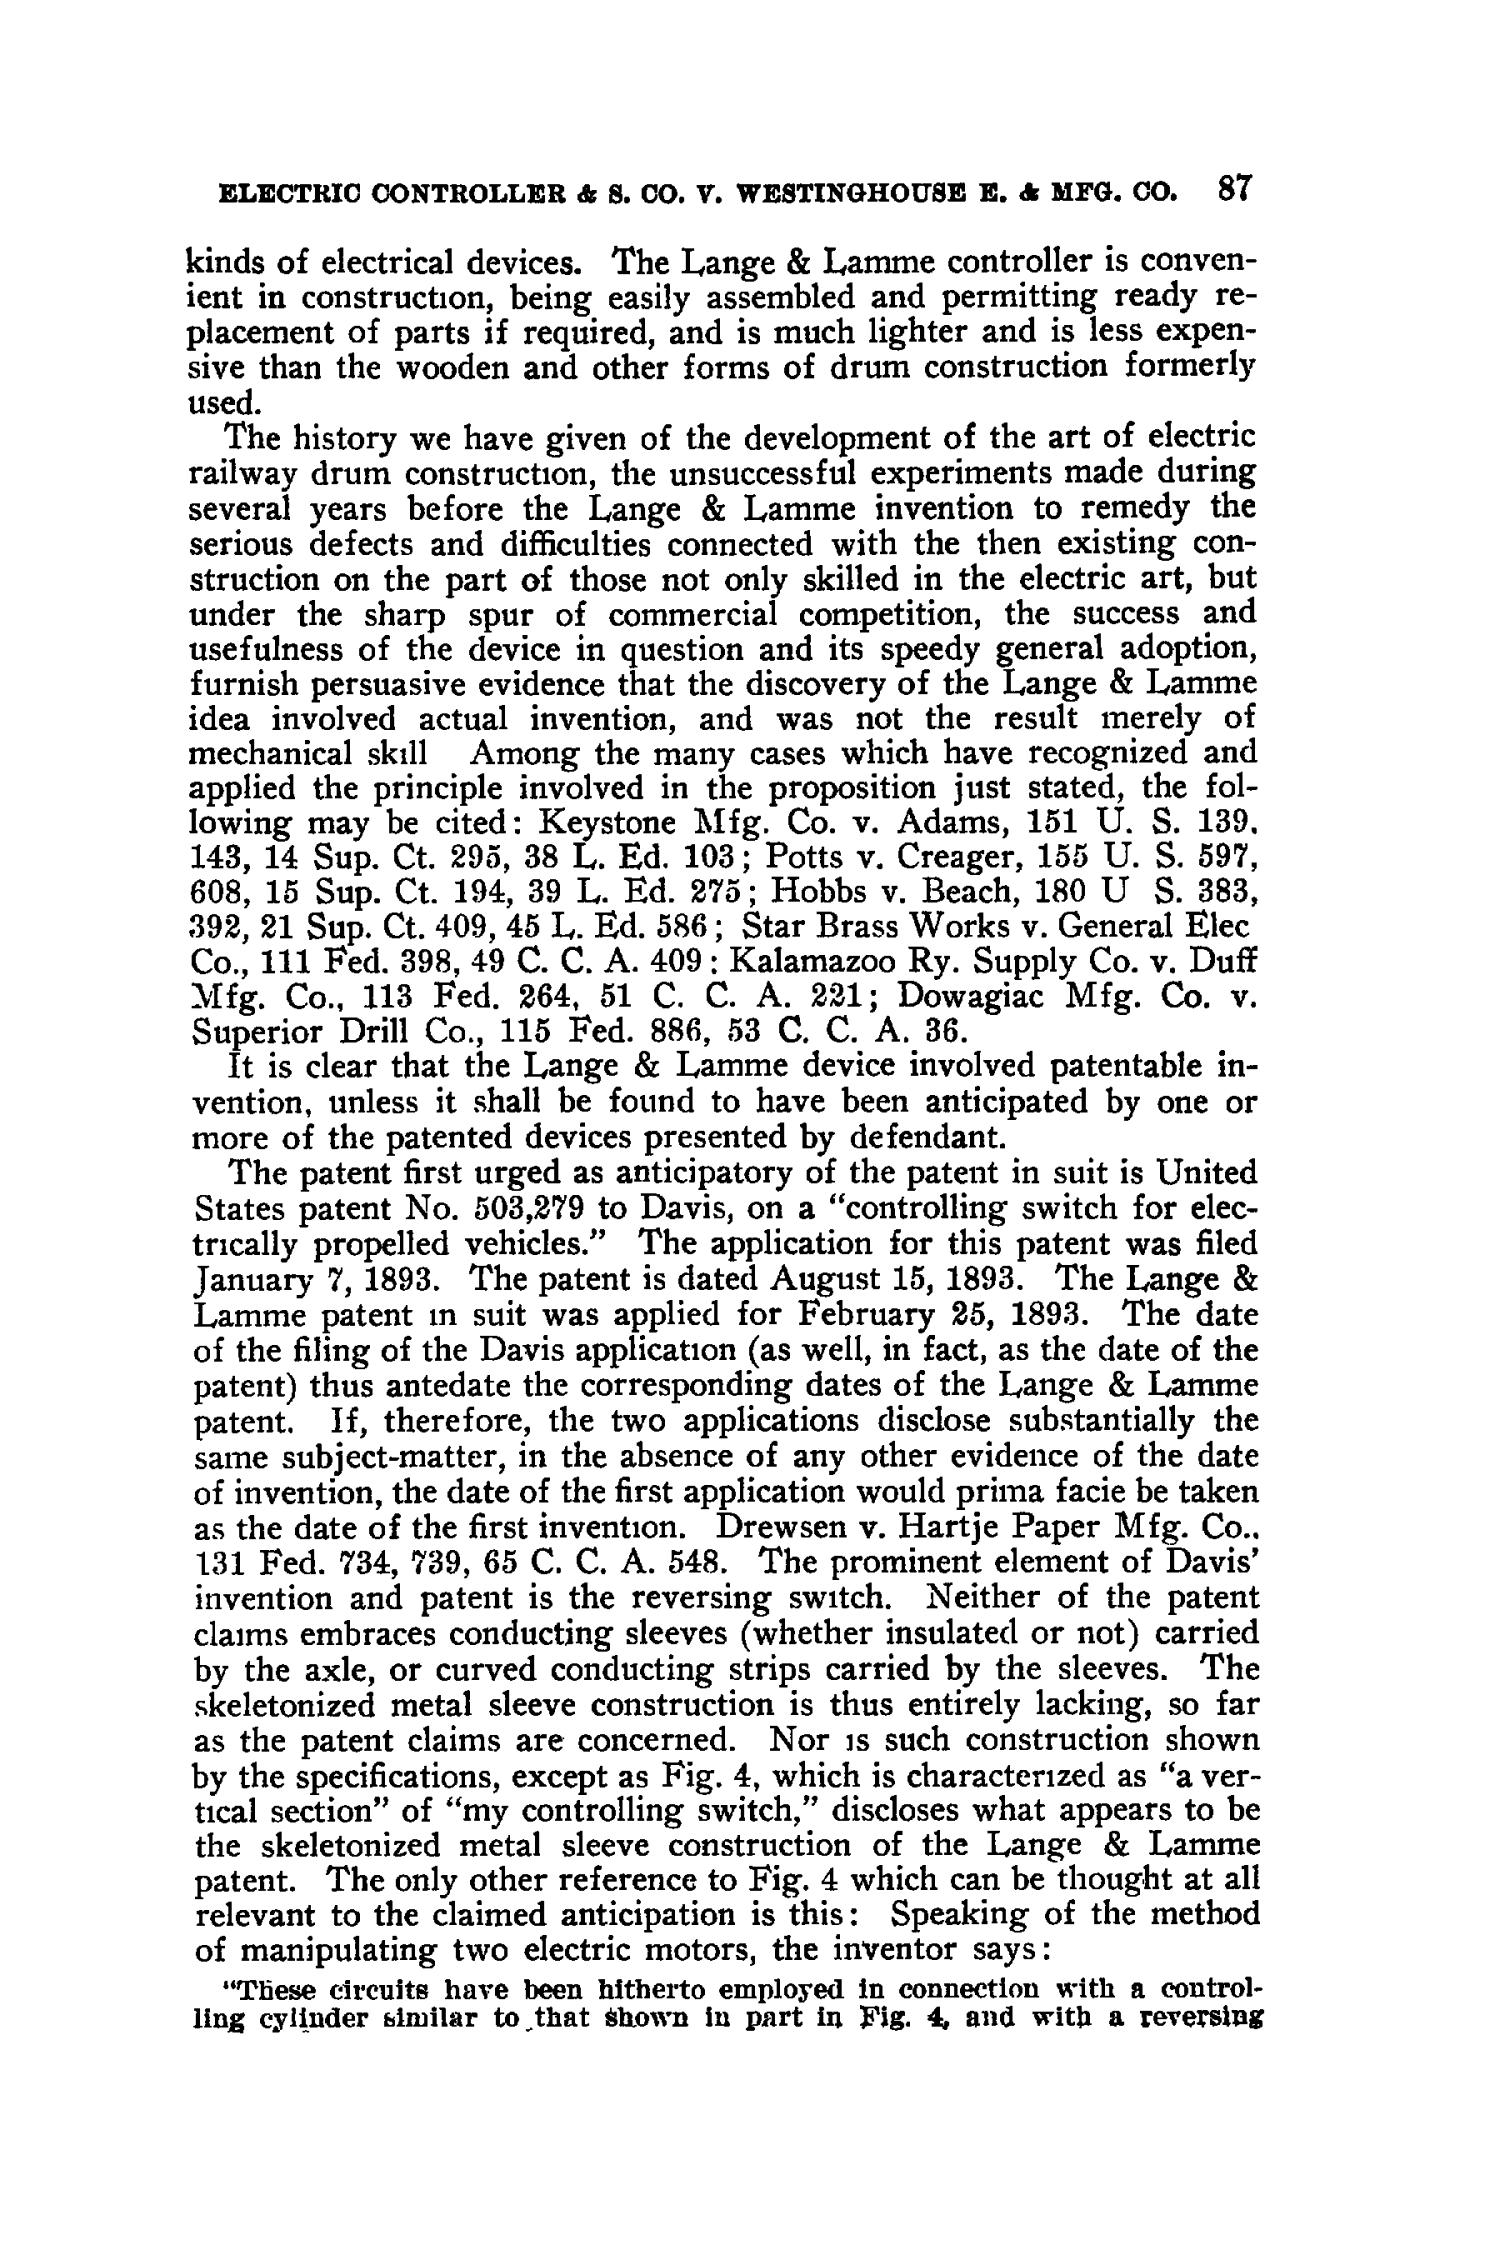 The Federal Reporter (Annotated), Volume 171: Cases Argued and Determined in the Circuit Courts of Appeals and Circuit and District Courts of the United States. September-October, 1909.
                                                
                                                    87
                                                